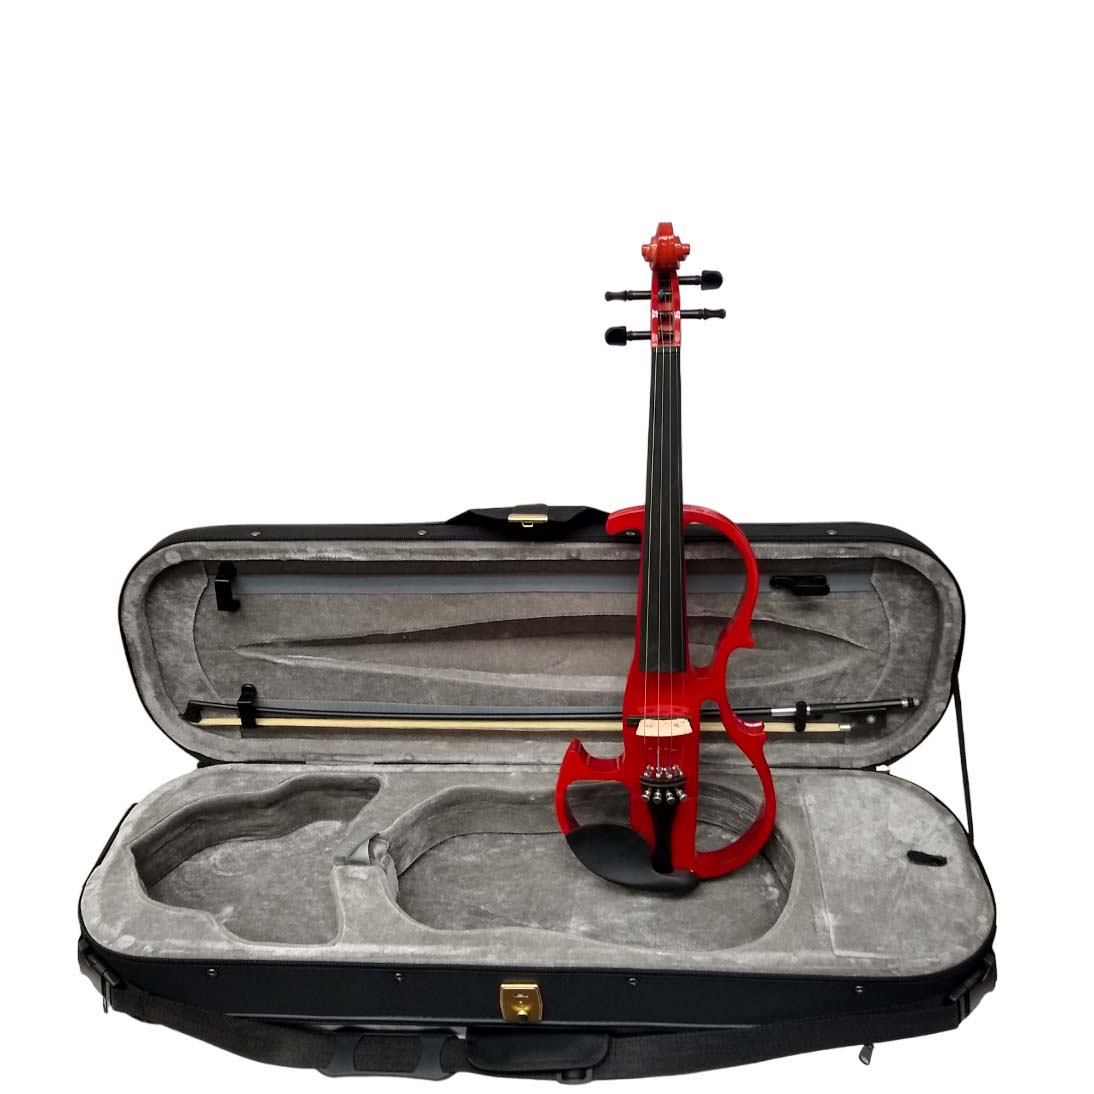   Vienna Strings Electra Violin Shaped Cutaway Speedway - Red